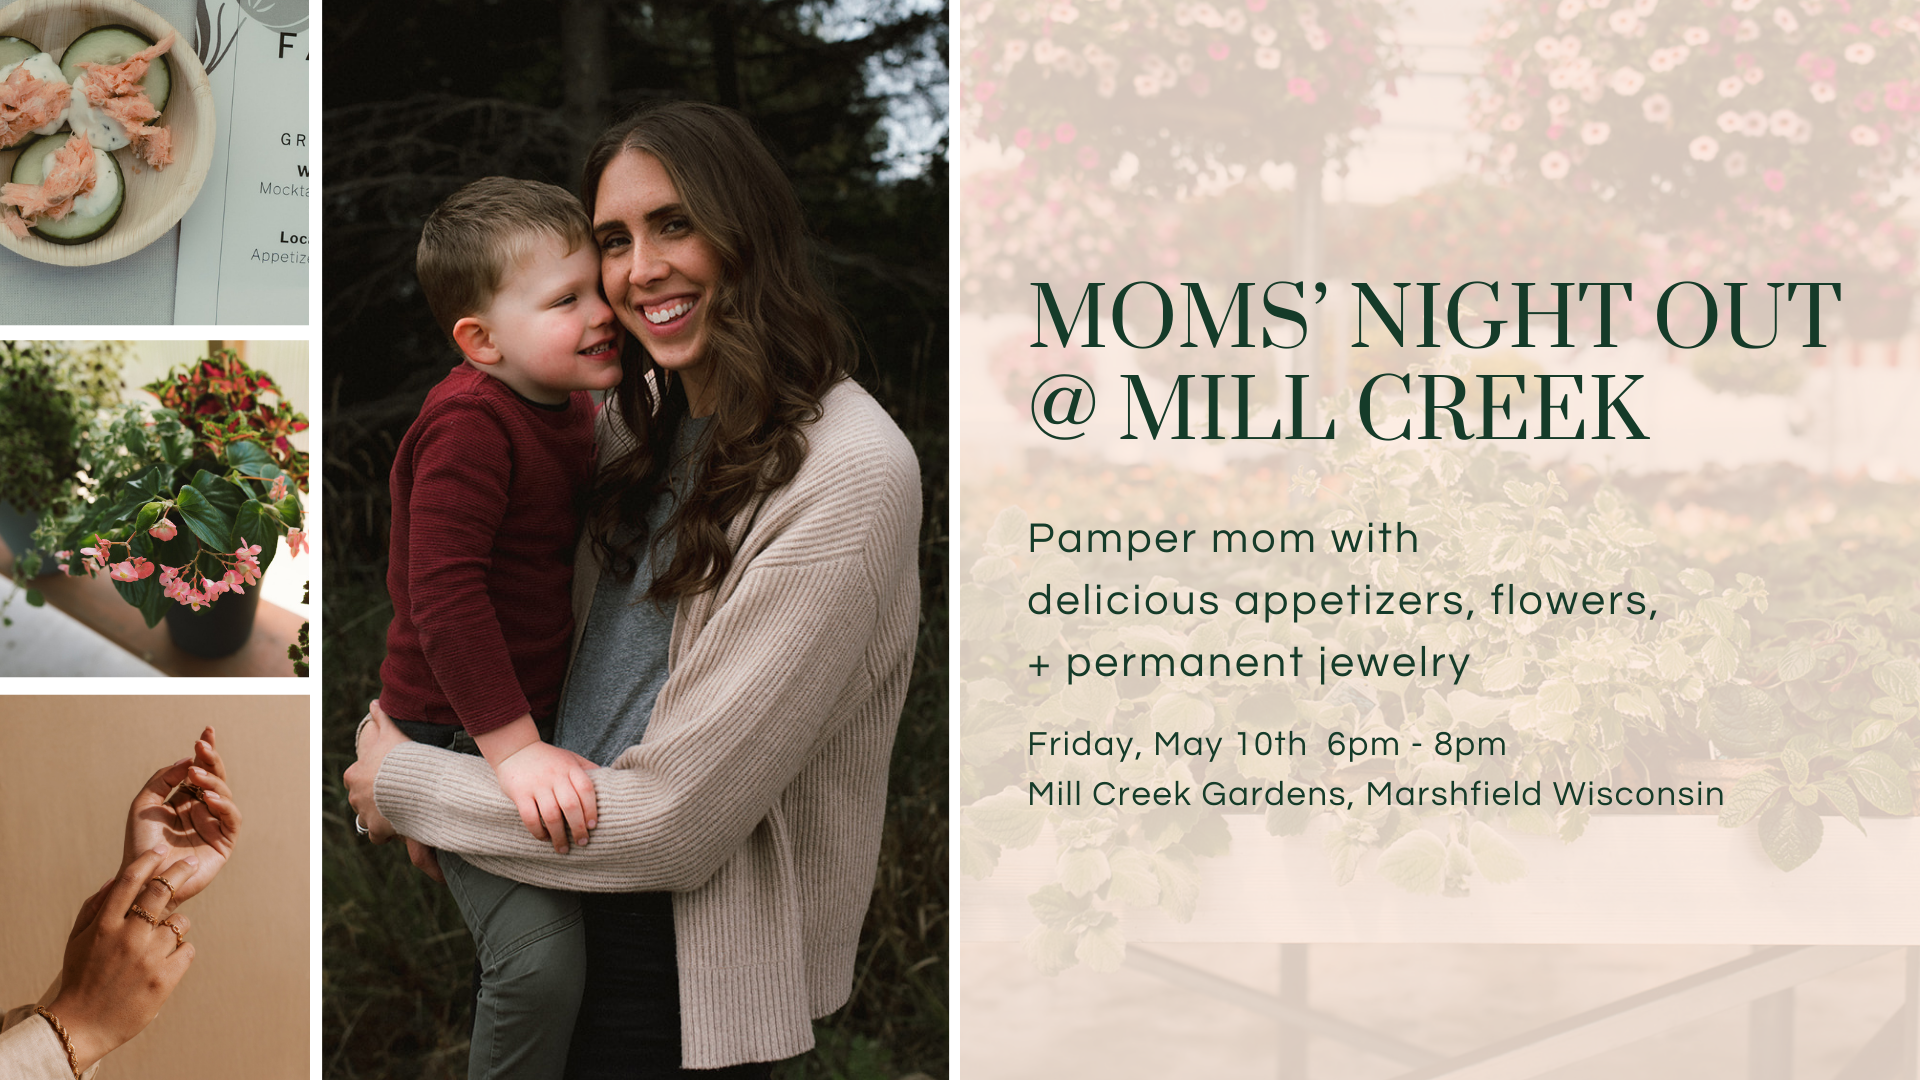 Mom's Night Out @ Mill Creek